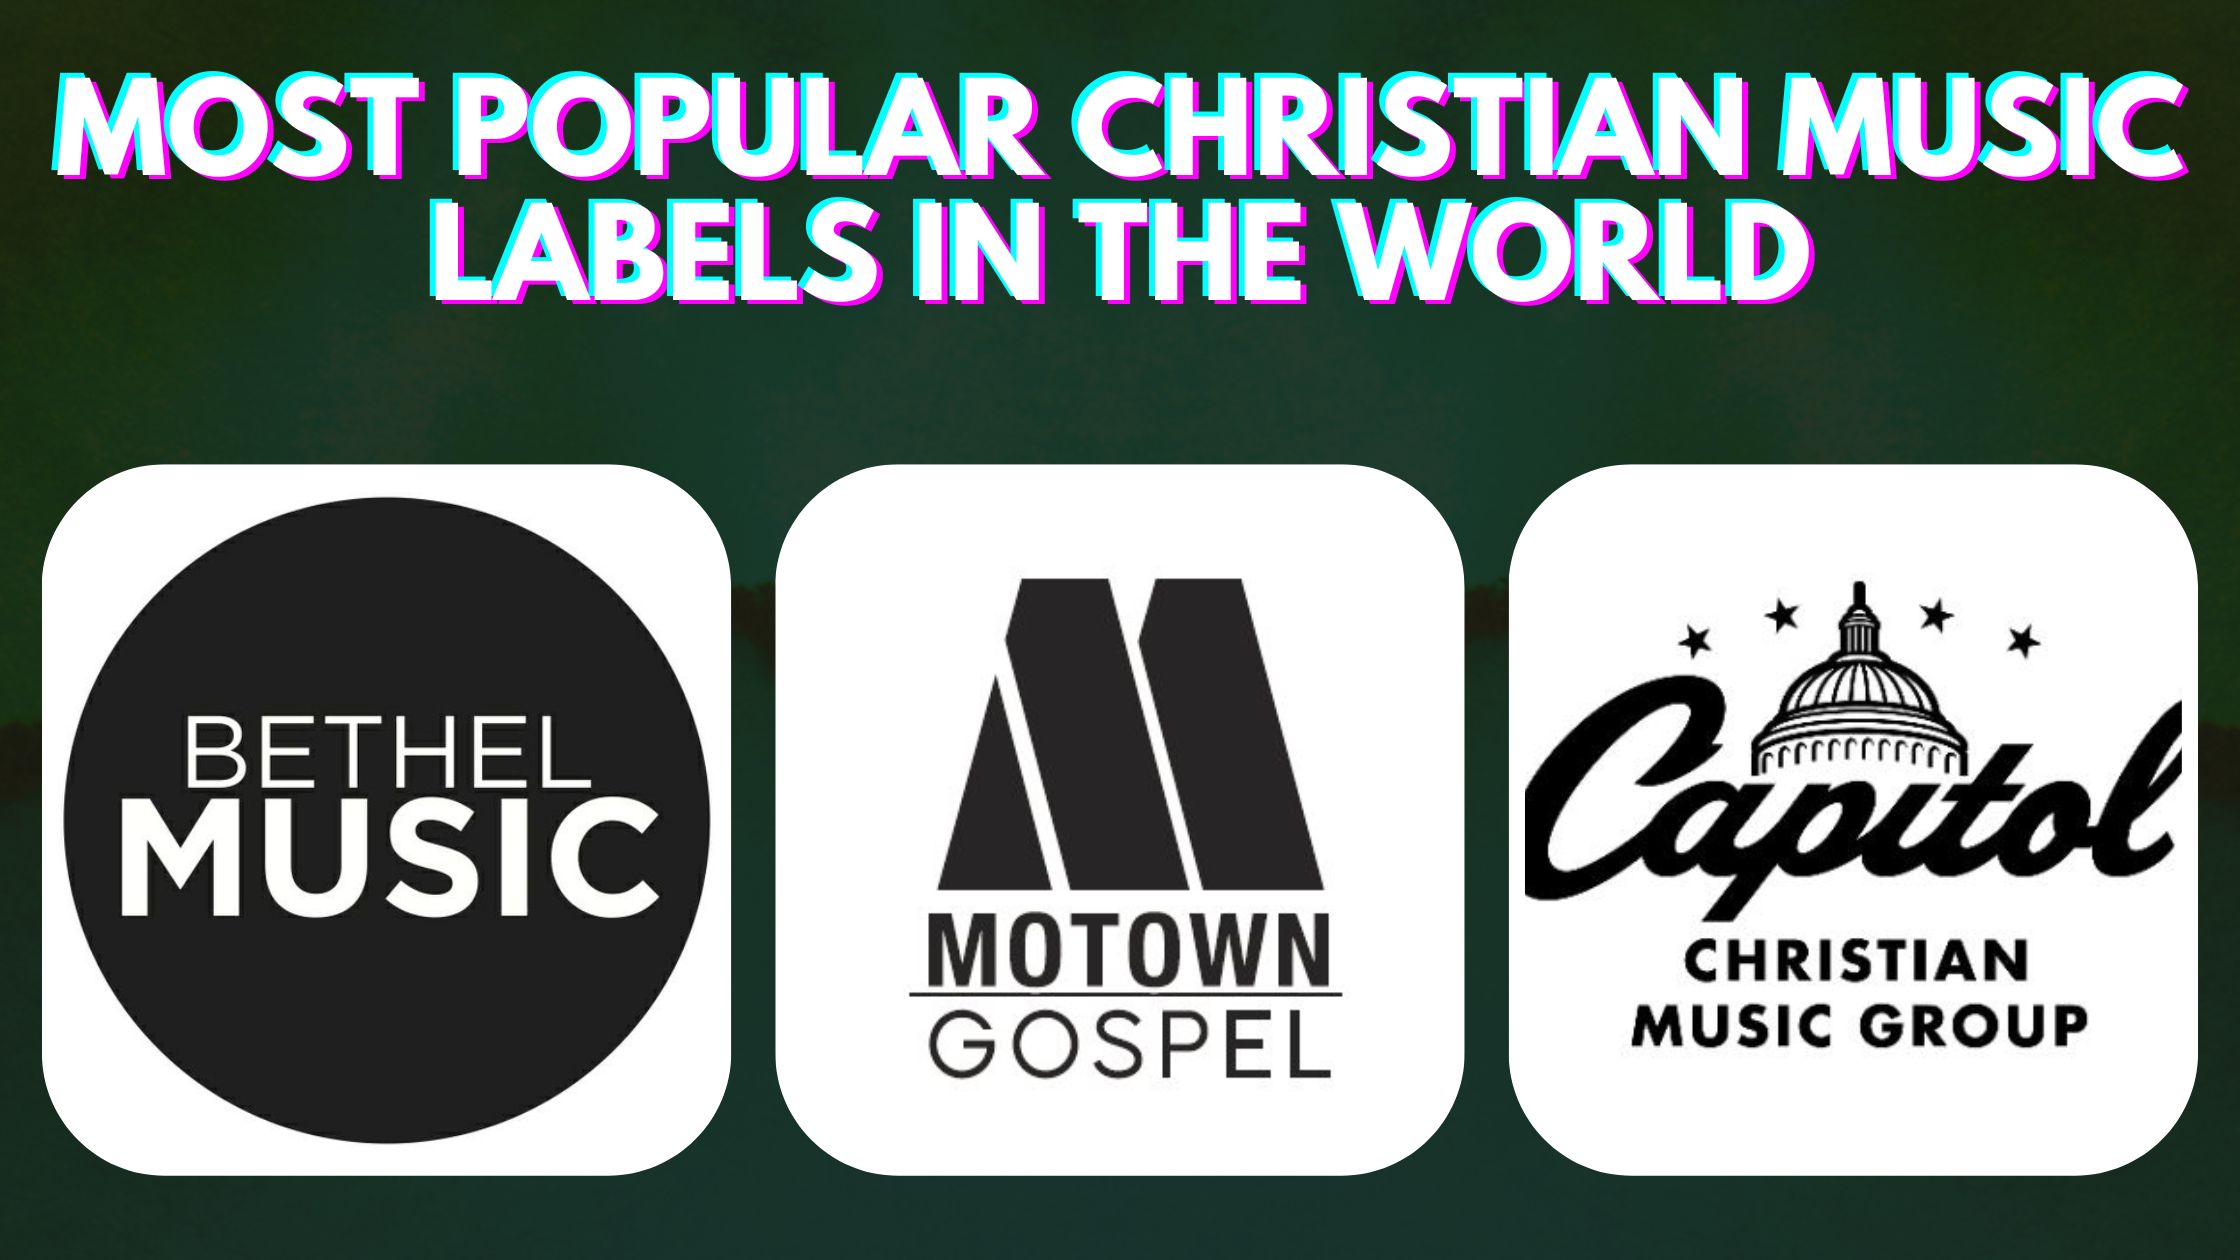 Most Popular Christian Music Labels in the World